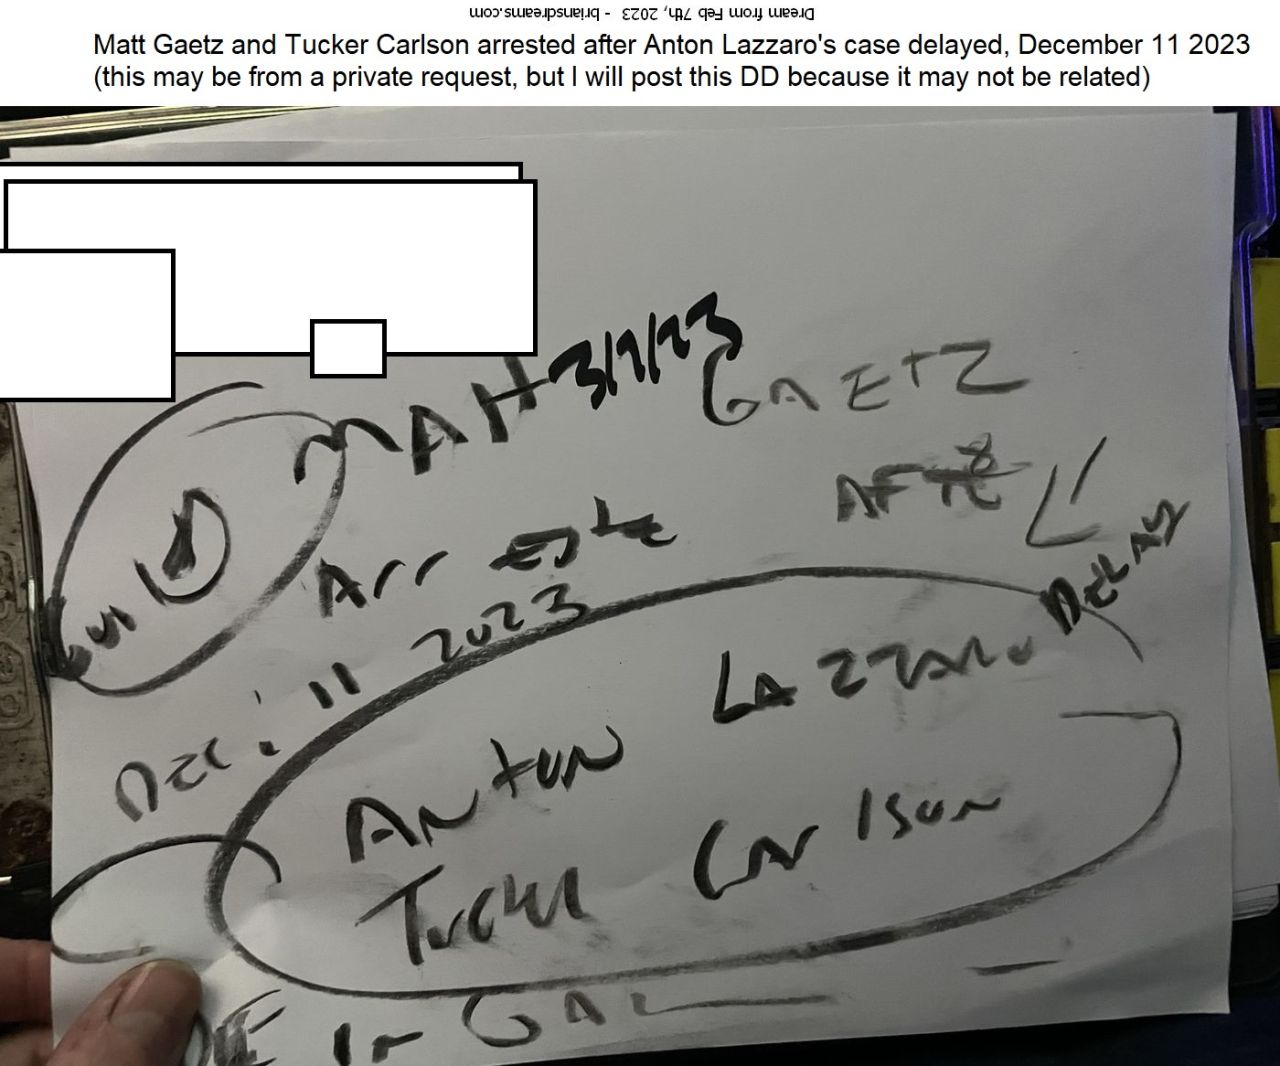 7 march 2023 2 Matt Gaetz and Tucker Carlson arrested after Anton Lazzaro's case delayed, December 11 2023  (this may be from a private request, but I will post this DD because it may not be related)
Matt Gaetz and Tucker Carlson arrested after Anton Lazzaro's case delayed, December 11 2023  (this may be from a private request, but I will post this DD because it may not be related)
